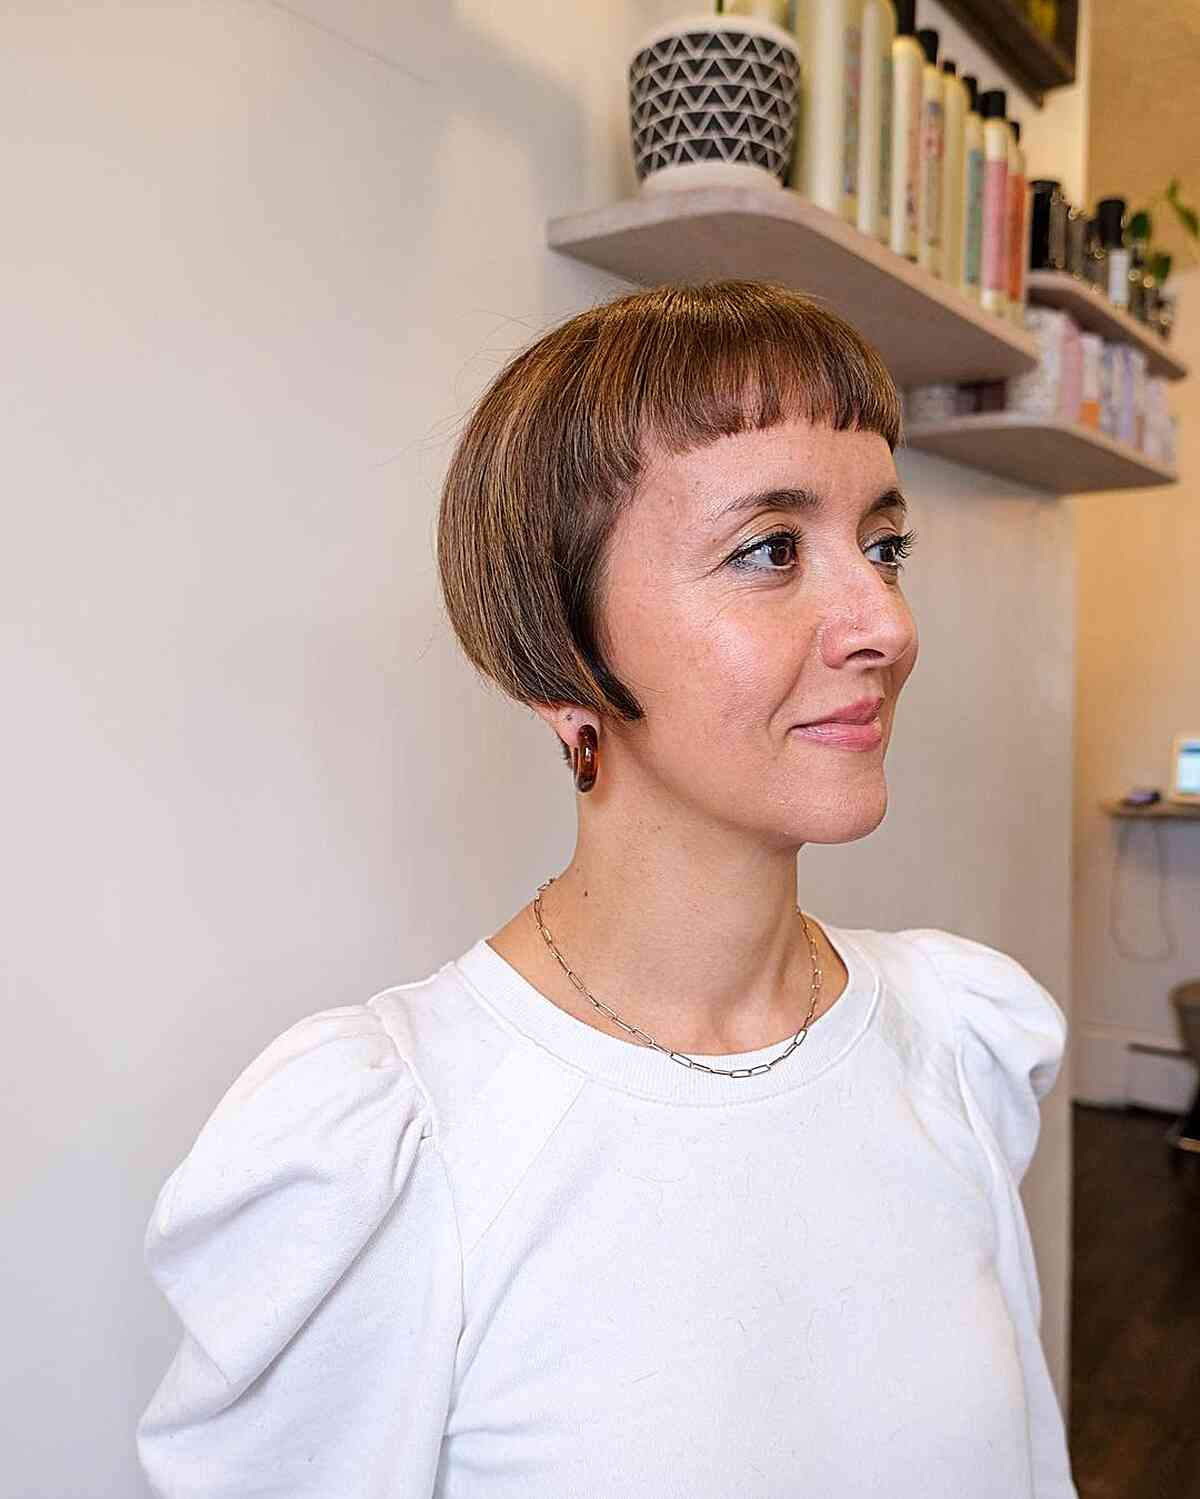 Undercut Ear-Length Bob with blunt fringe for women with longer faces